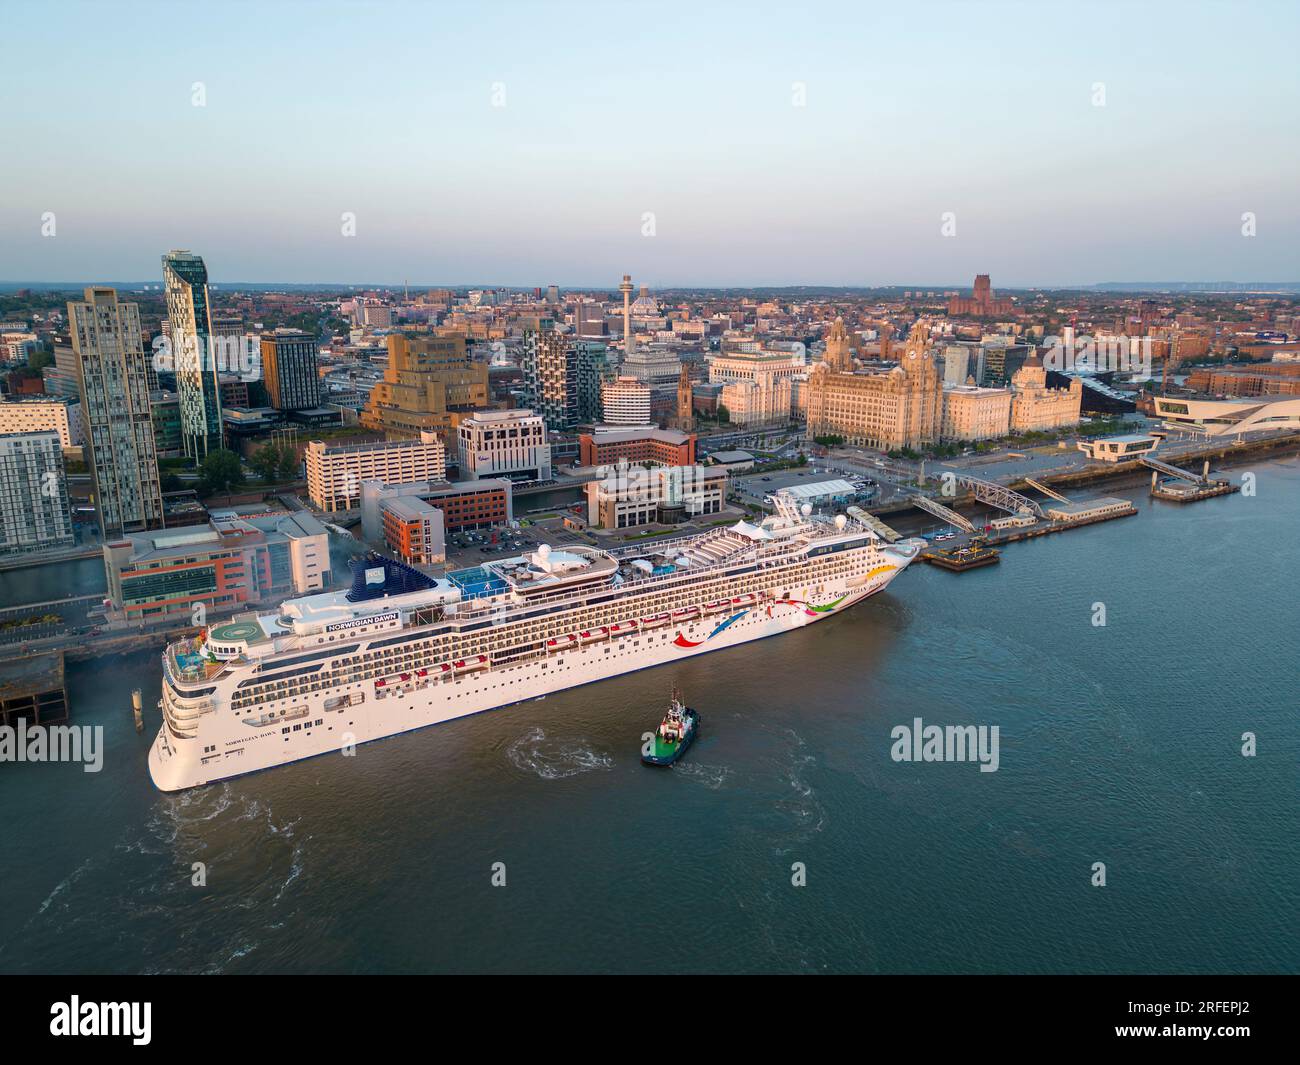 Norwegian Dawn cruise ship docked at the Pier Head, Liverpool, England Stock Photo